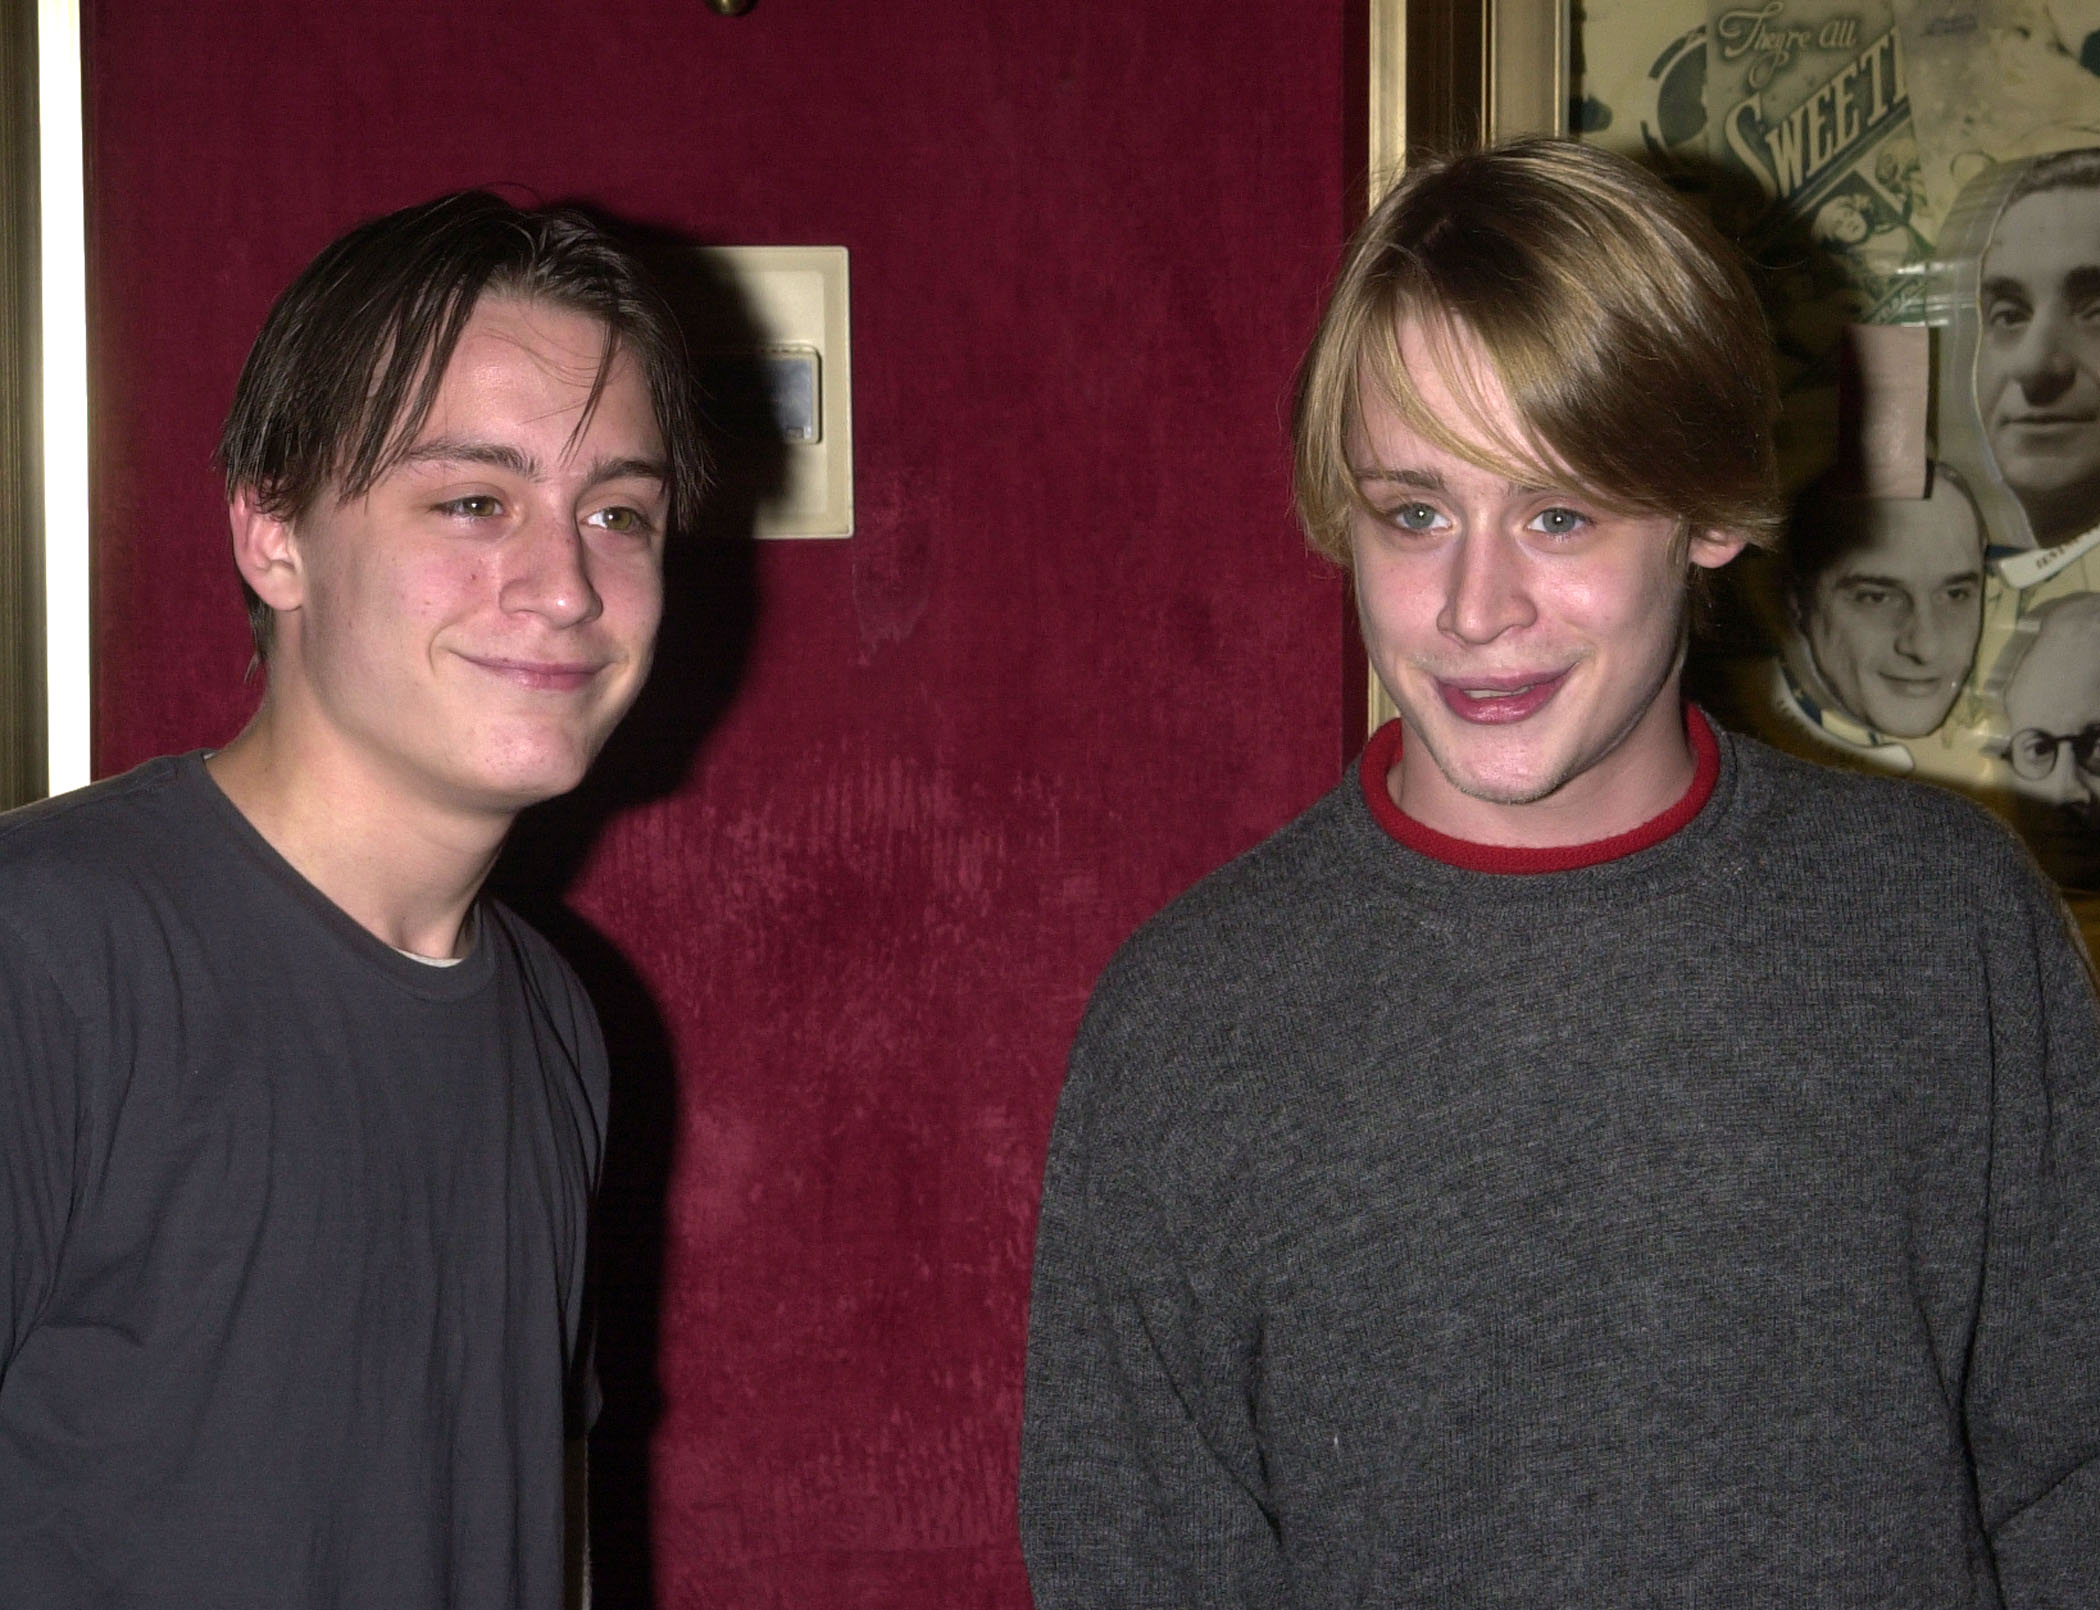 Kieran and Macaulay Culkin attend the premiere of "Serendipity" in New York City | Source: Getty Images